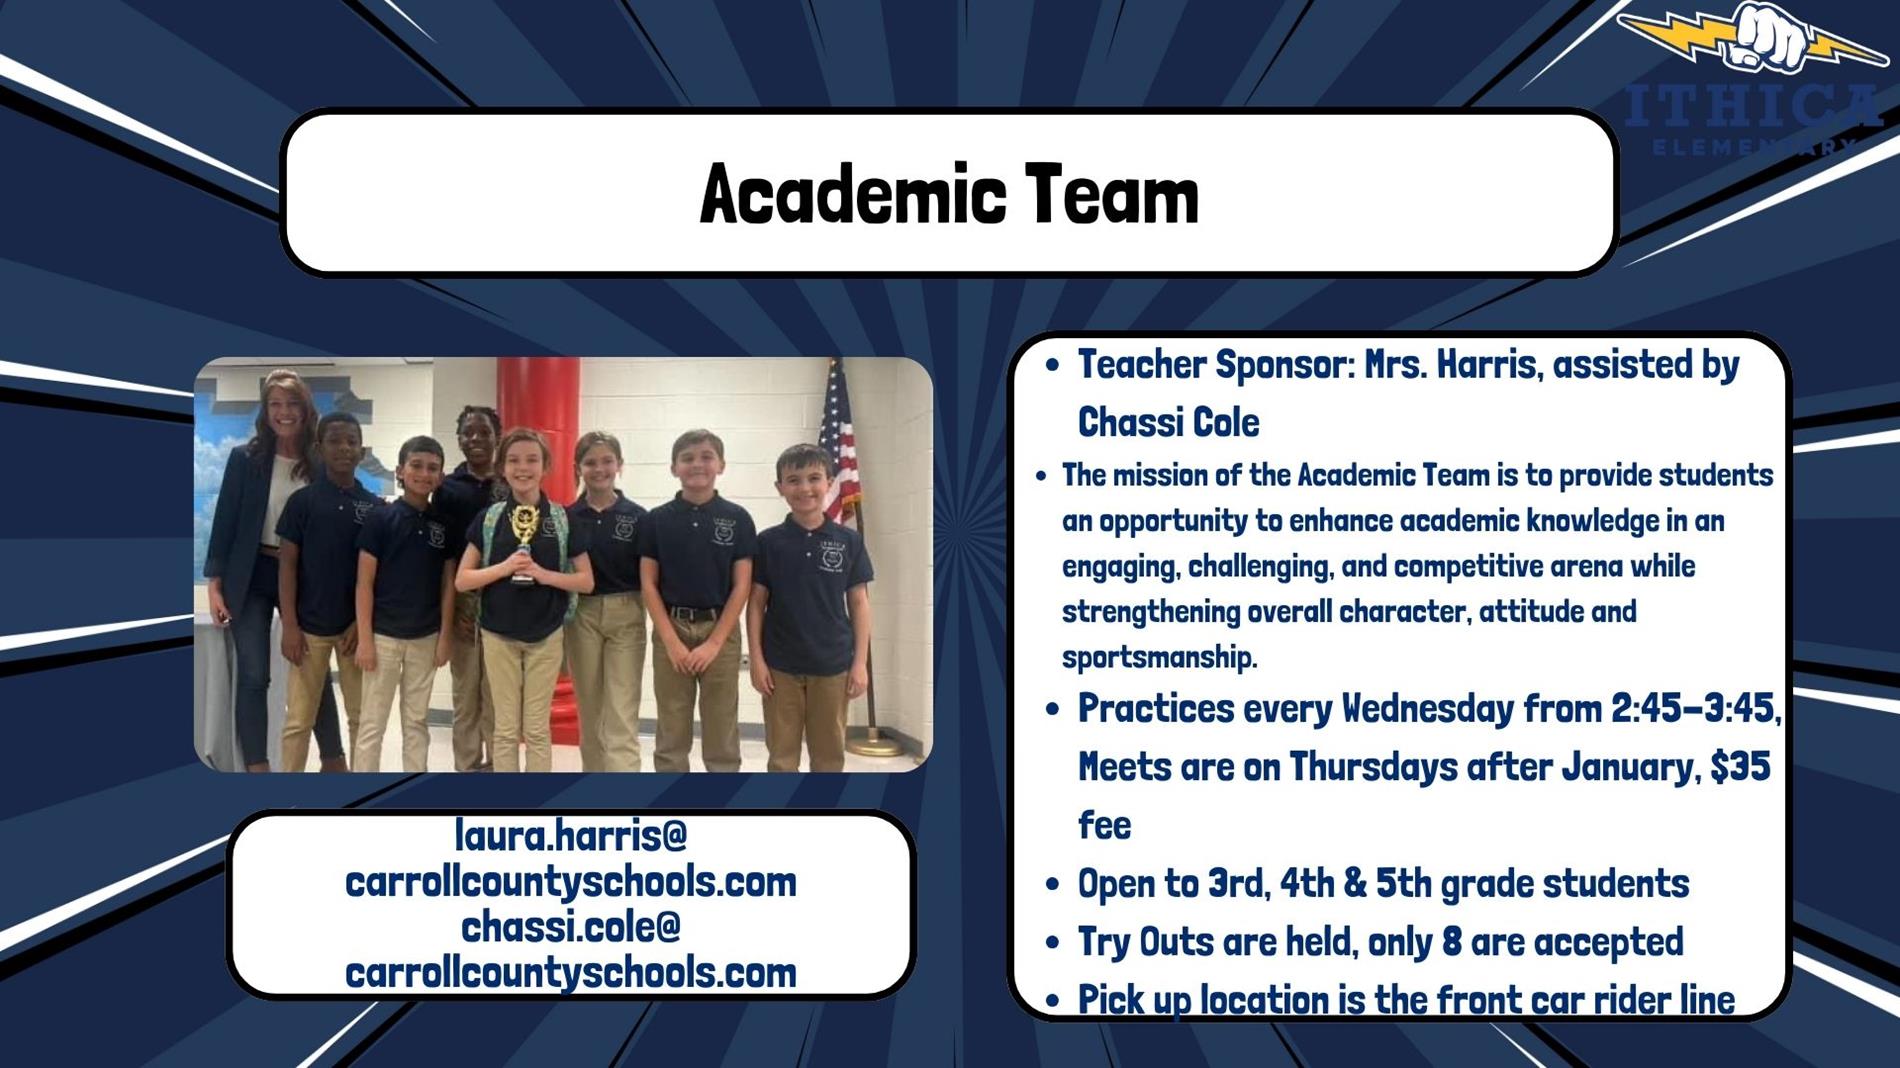 information about the academic team